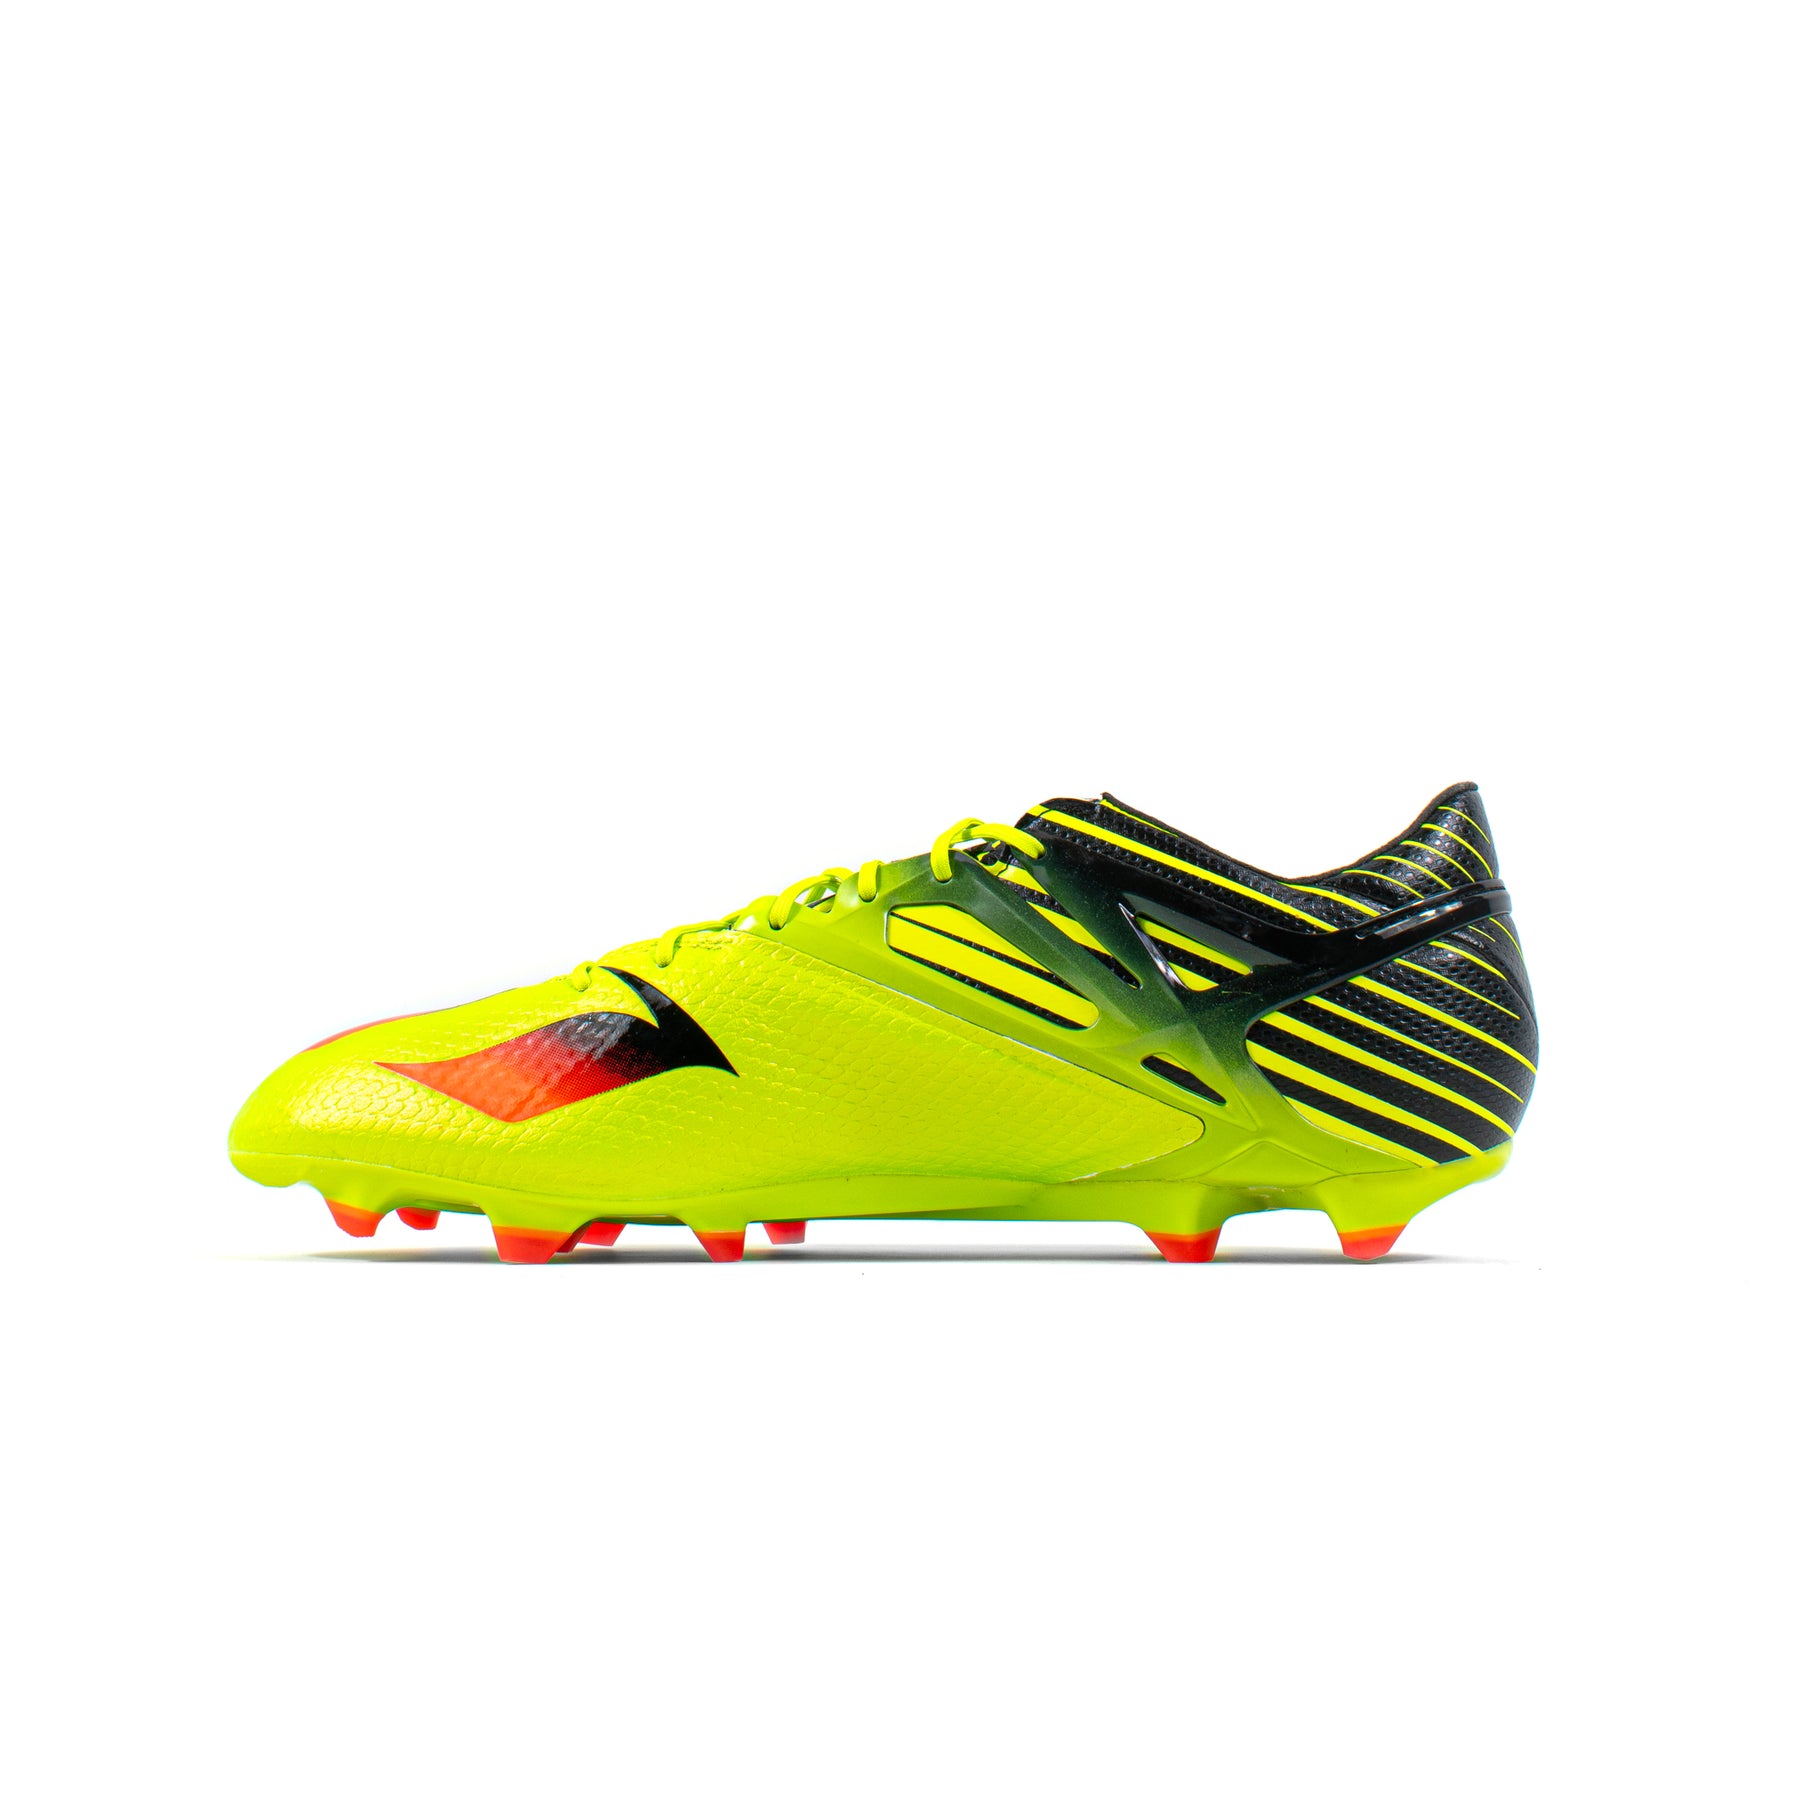 Adidas Messi 15.1 2015 FG – Classic Soccer Cleats